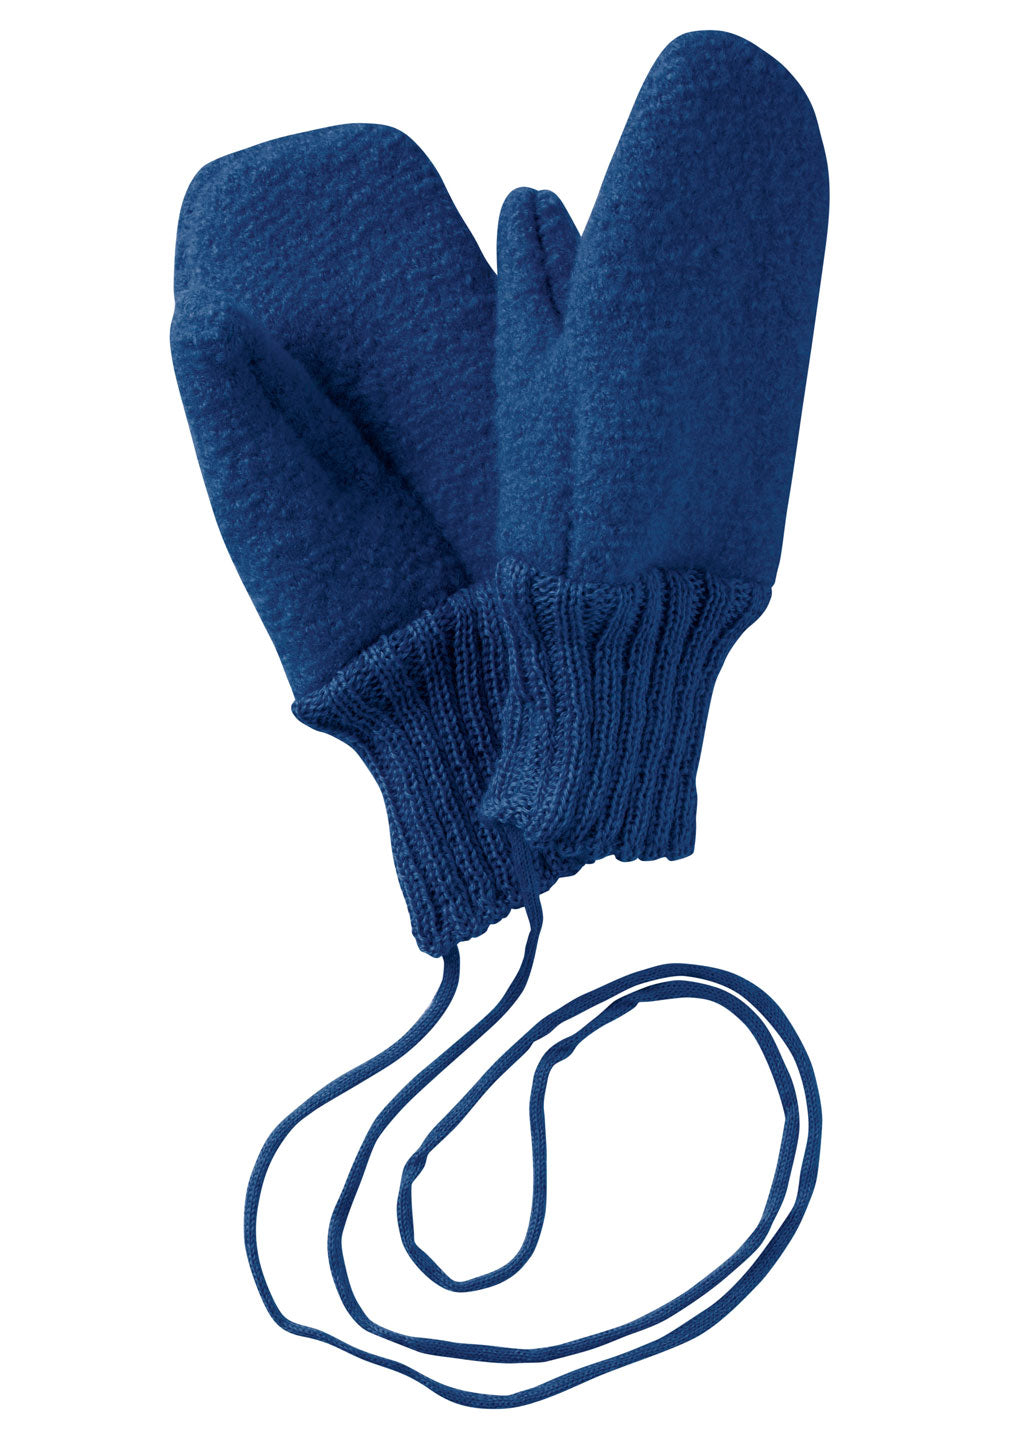 Disana boiled wool mittens in navy